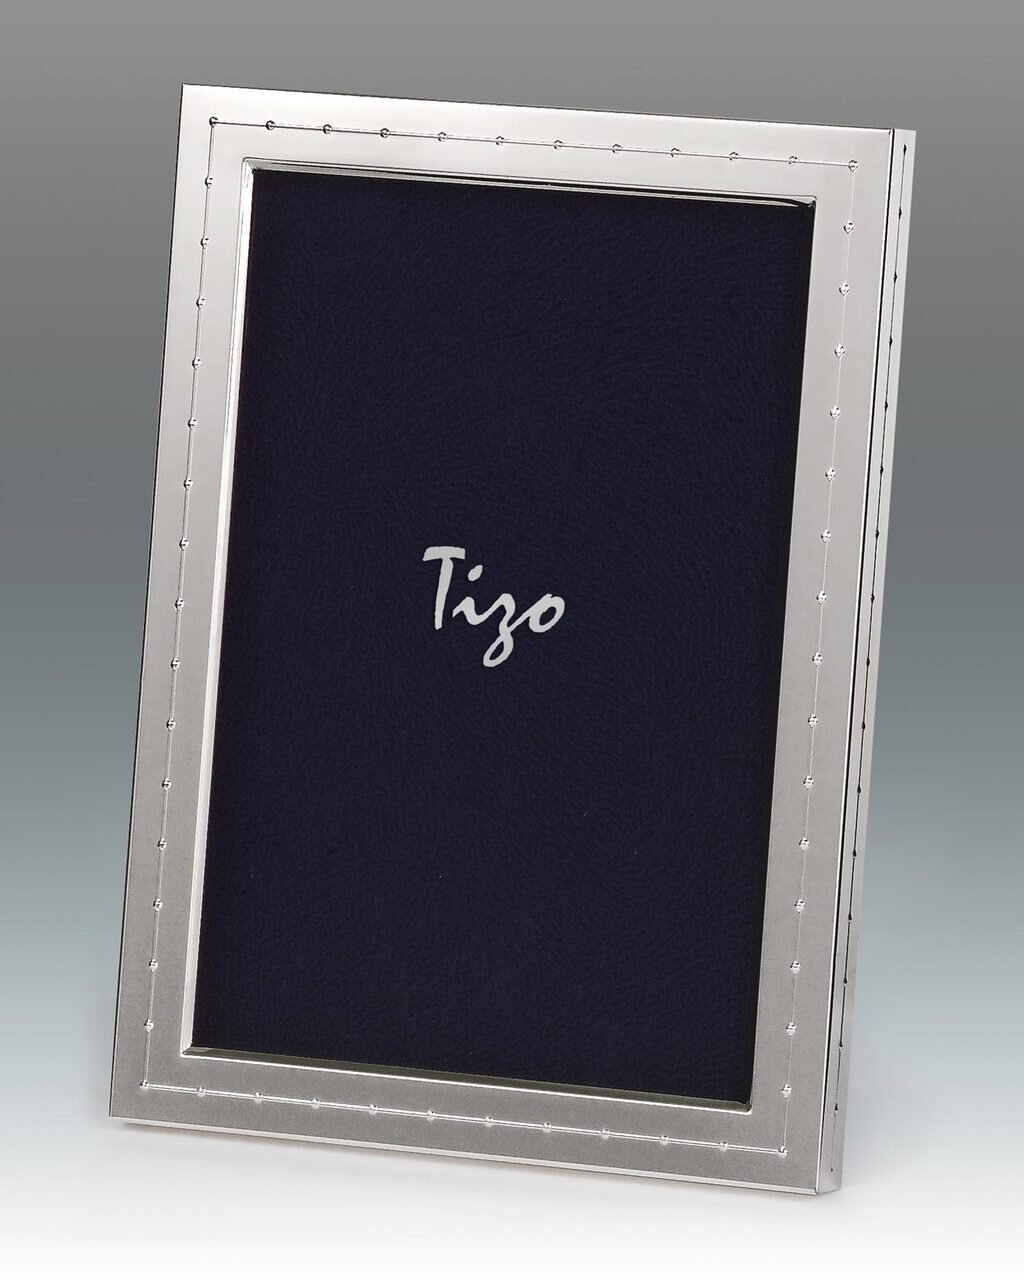 Tizo Ropes 8 x 10 Inch Silver Plated Picture Frame